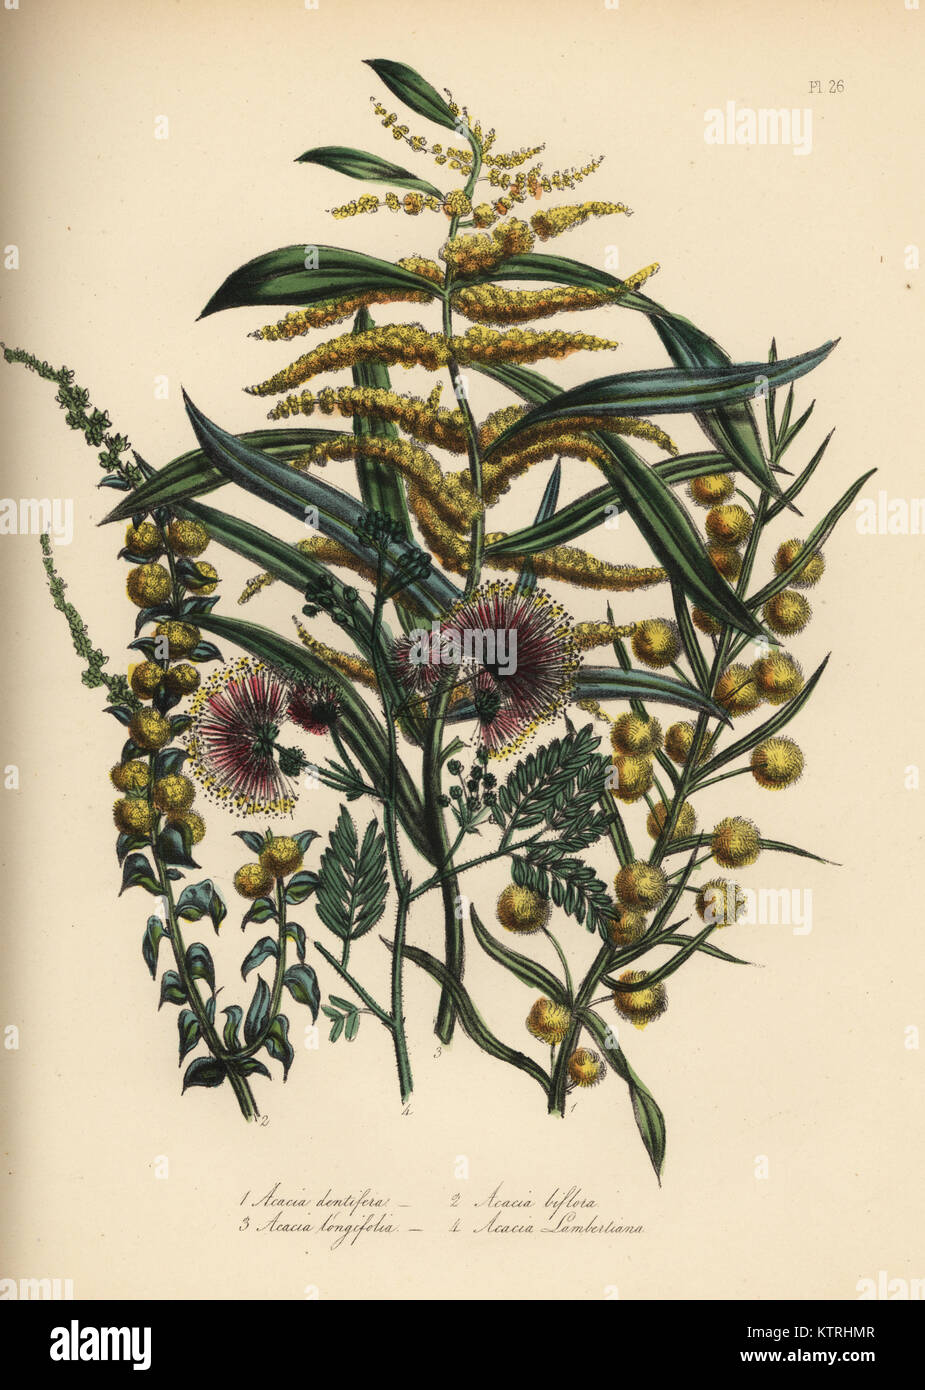 Toothed acacia, Acacia dentifera, twin-flowered, Acacia biflora, long-leaved, Acacia longifolia, and Mr. Lambert's acacia, Acacia lambertiana. Handfinished chromolithograph by Henry Noel Humphreys after an illustration by Jane Loudon from Mrs. Jane Loudon's Ladies Flower Garden or Ornamental Greenhouse Plants, William S. Orr, London, 1849. Stock Photo